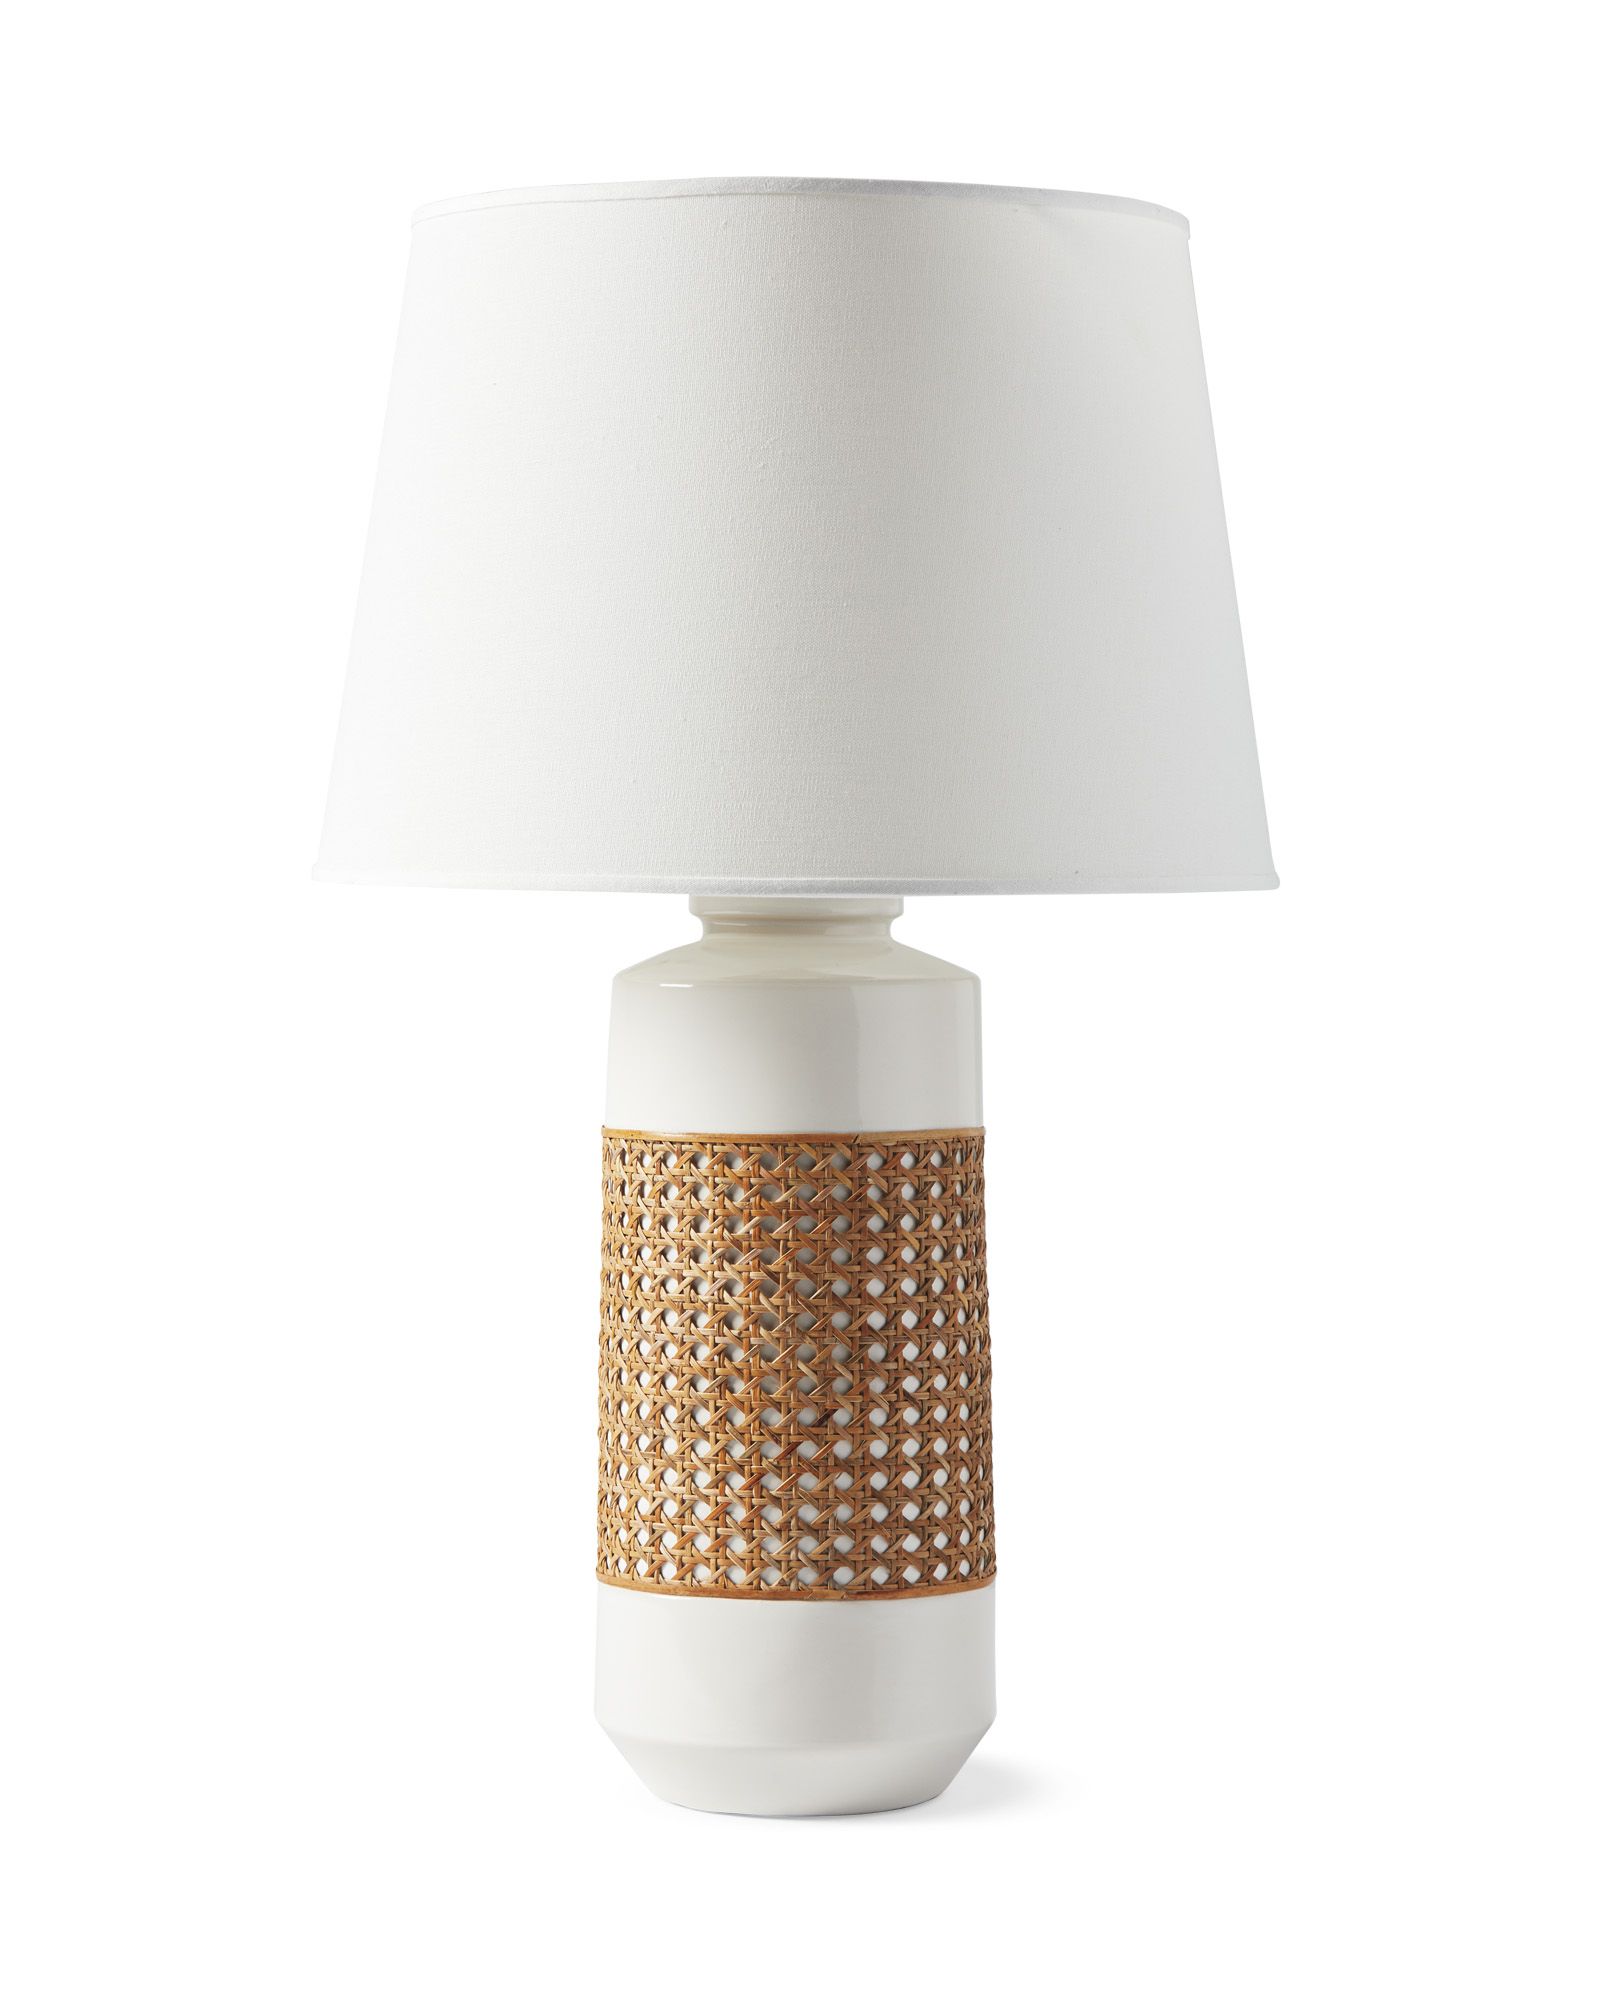 Round Hill Table Lamp | Serena and Lily